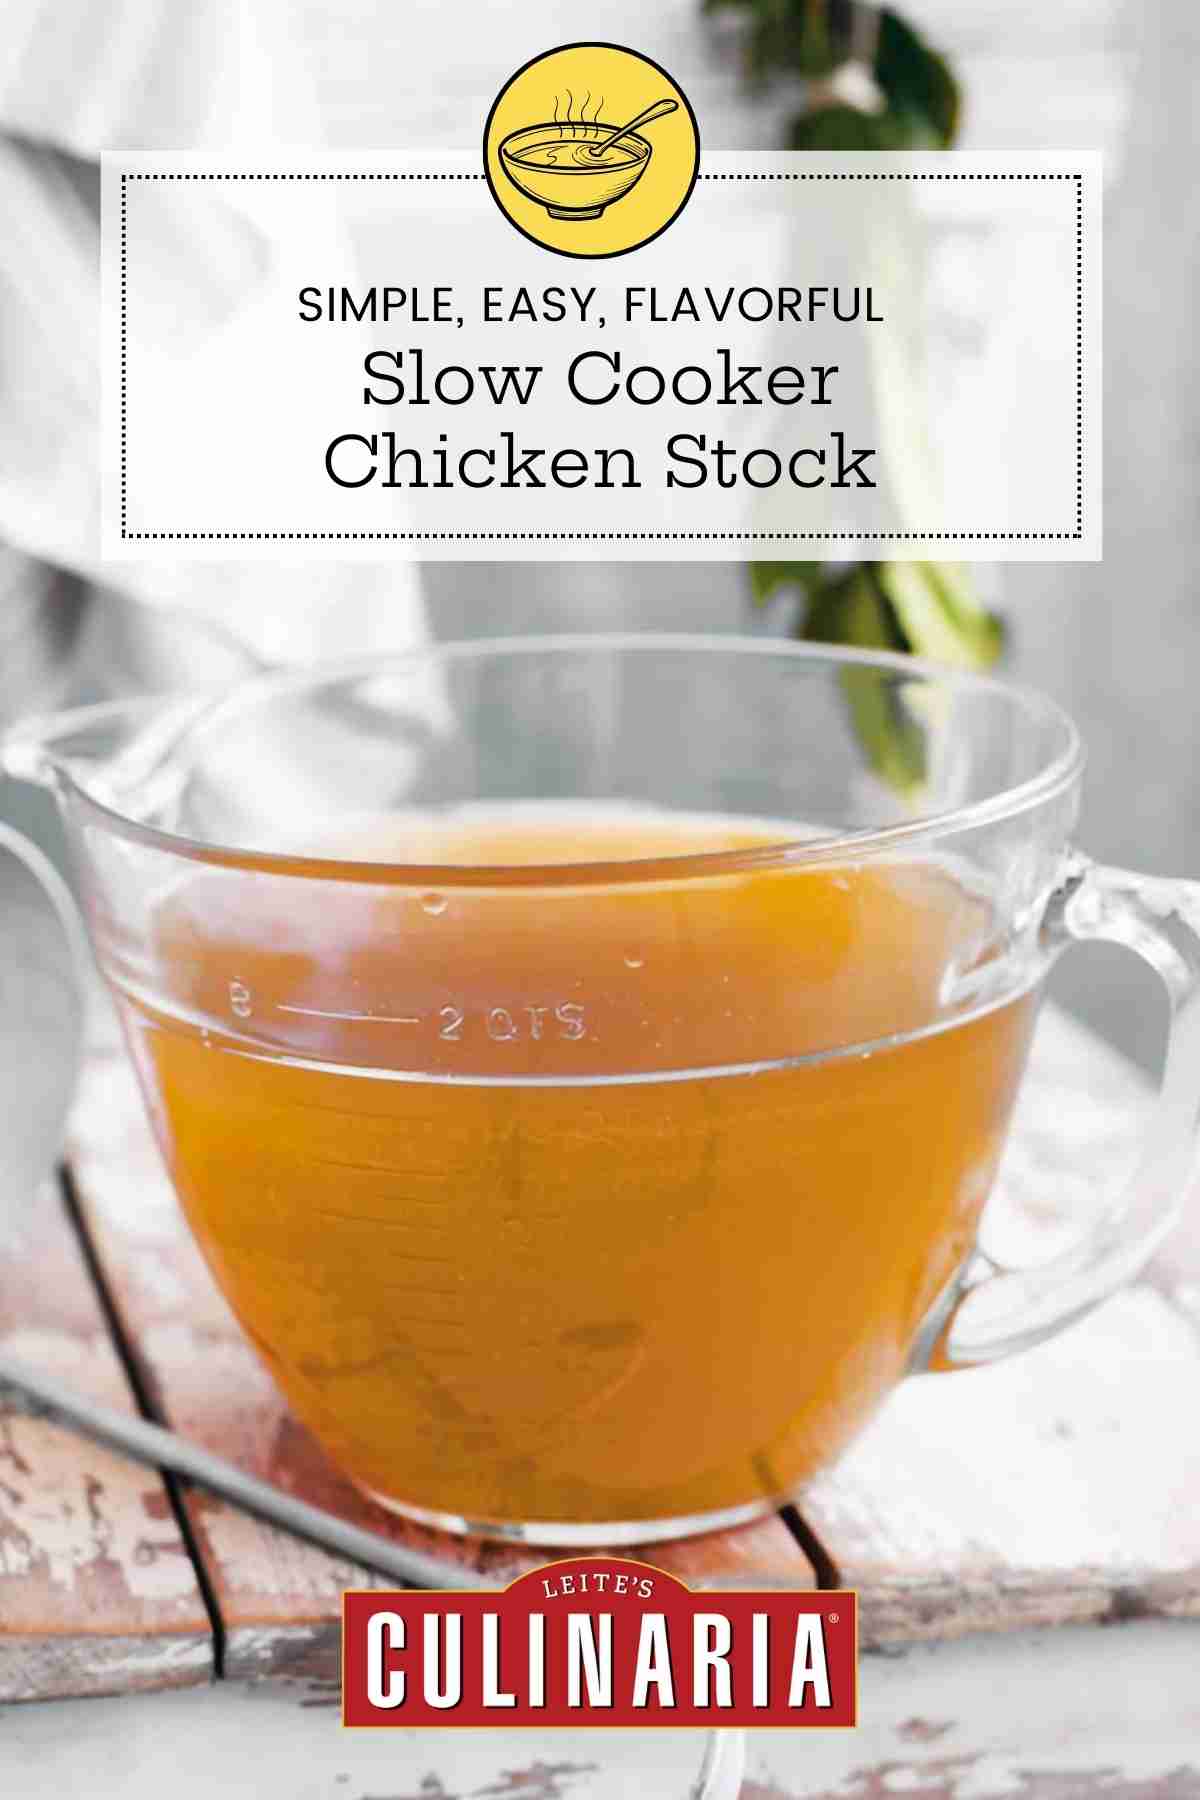 A large measuring cup of slow cooker chicken stock on a wooden table with a ladle on the side.